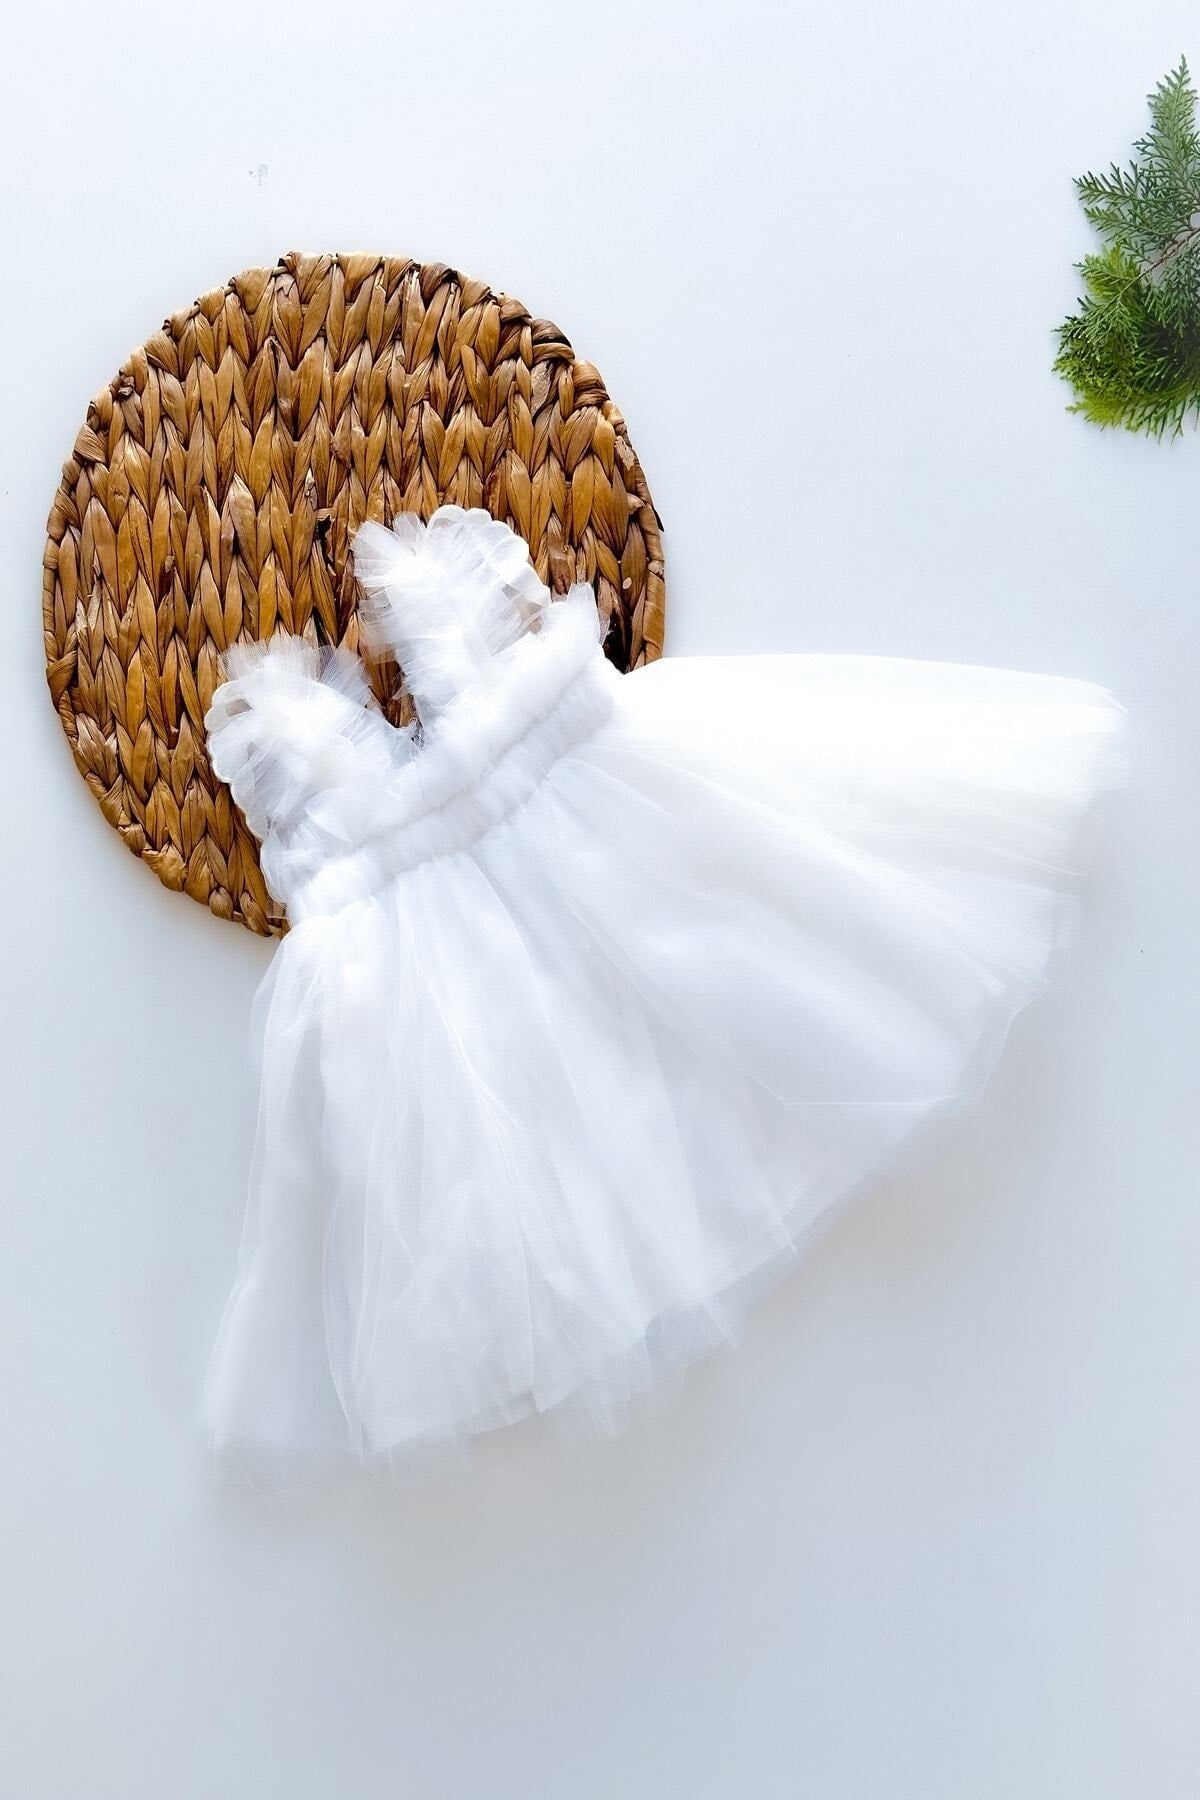 Baby Girl Girl Child Birthday Party Wedding Summer Dress Tulle Tutu Lined Baby Suit Infant Clothing